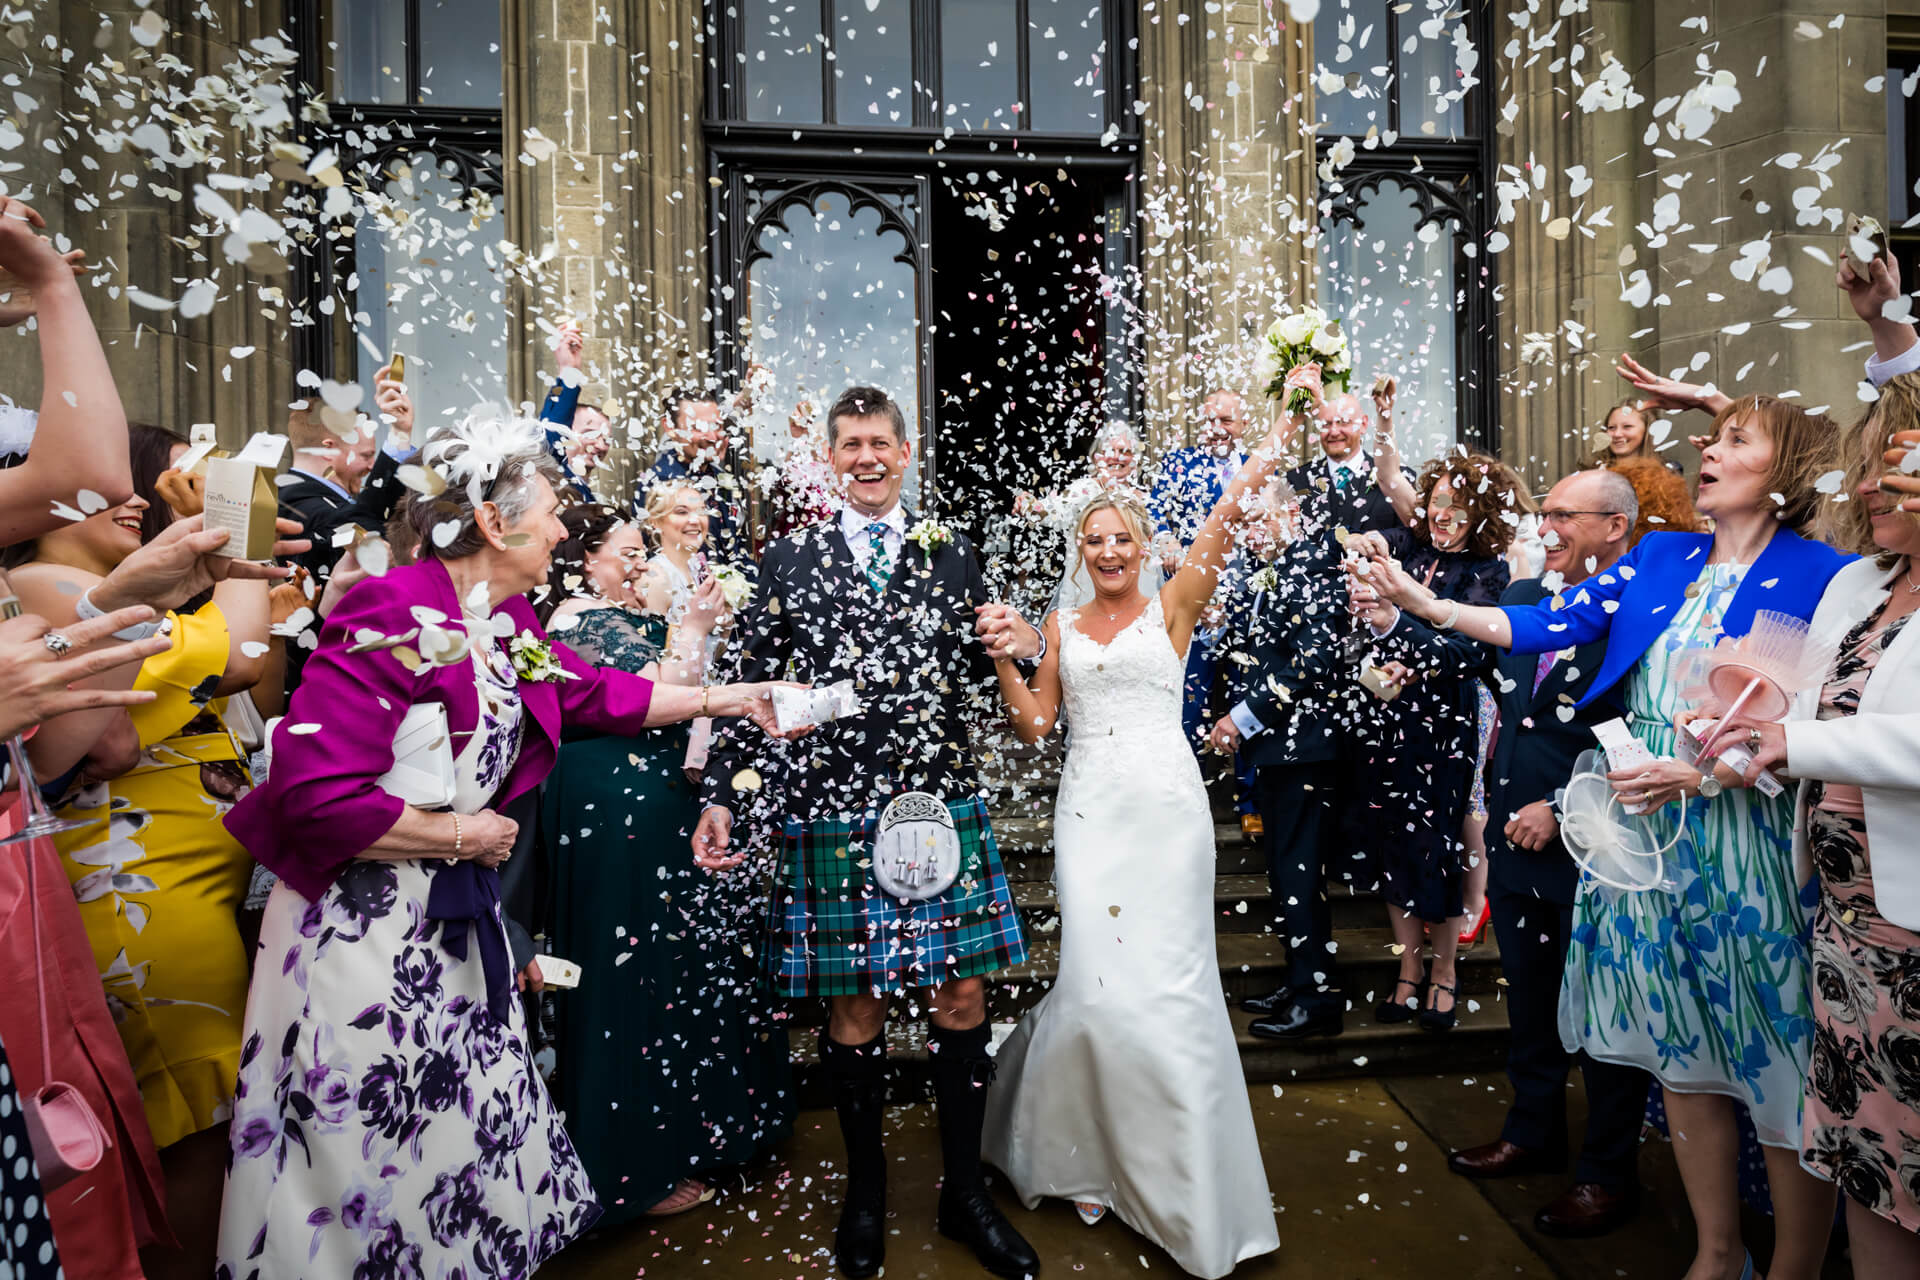 guests showering the wedding couple with confetti at Allerton Castle